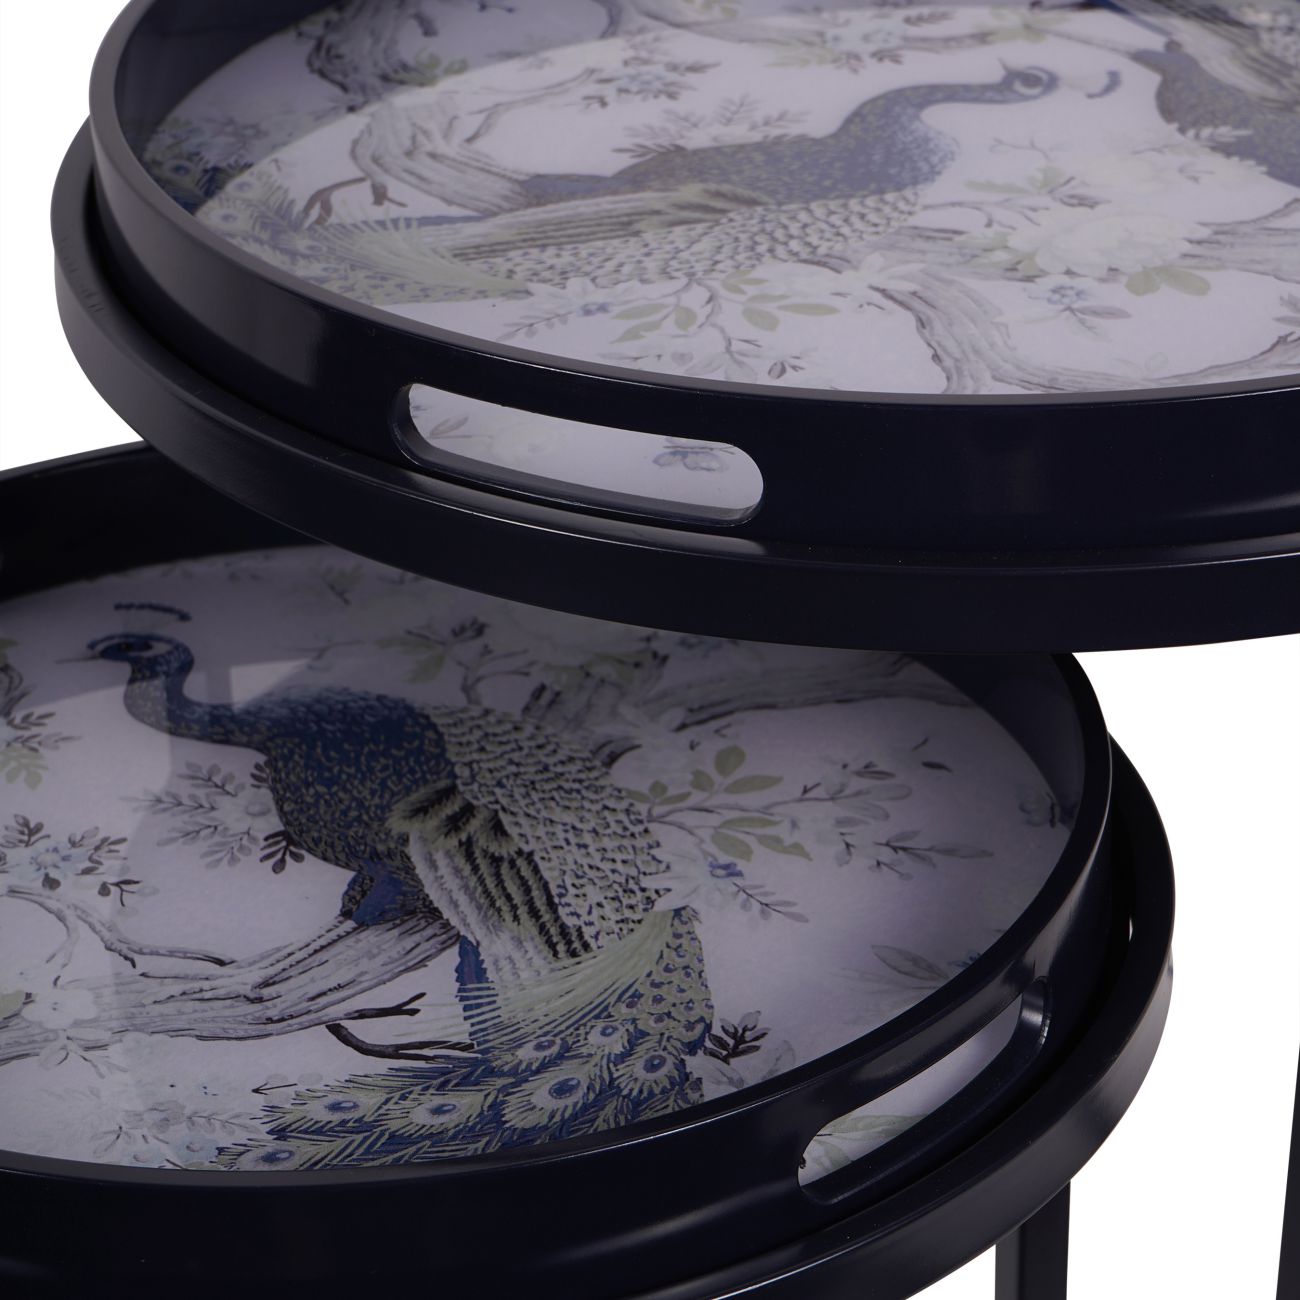 Laura Ashley Belvedere Peacock Print Set Of 2 Side Tables